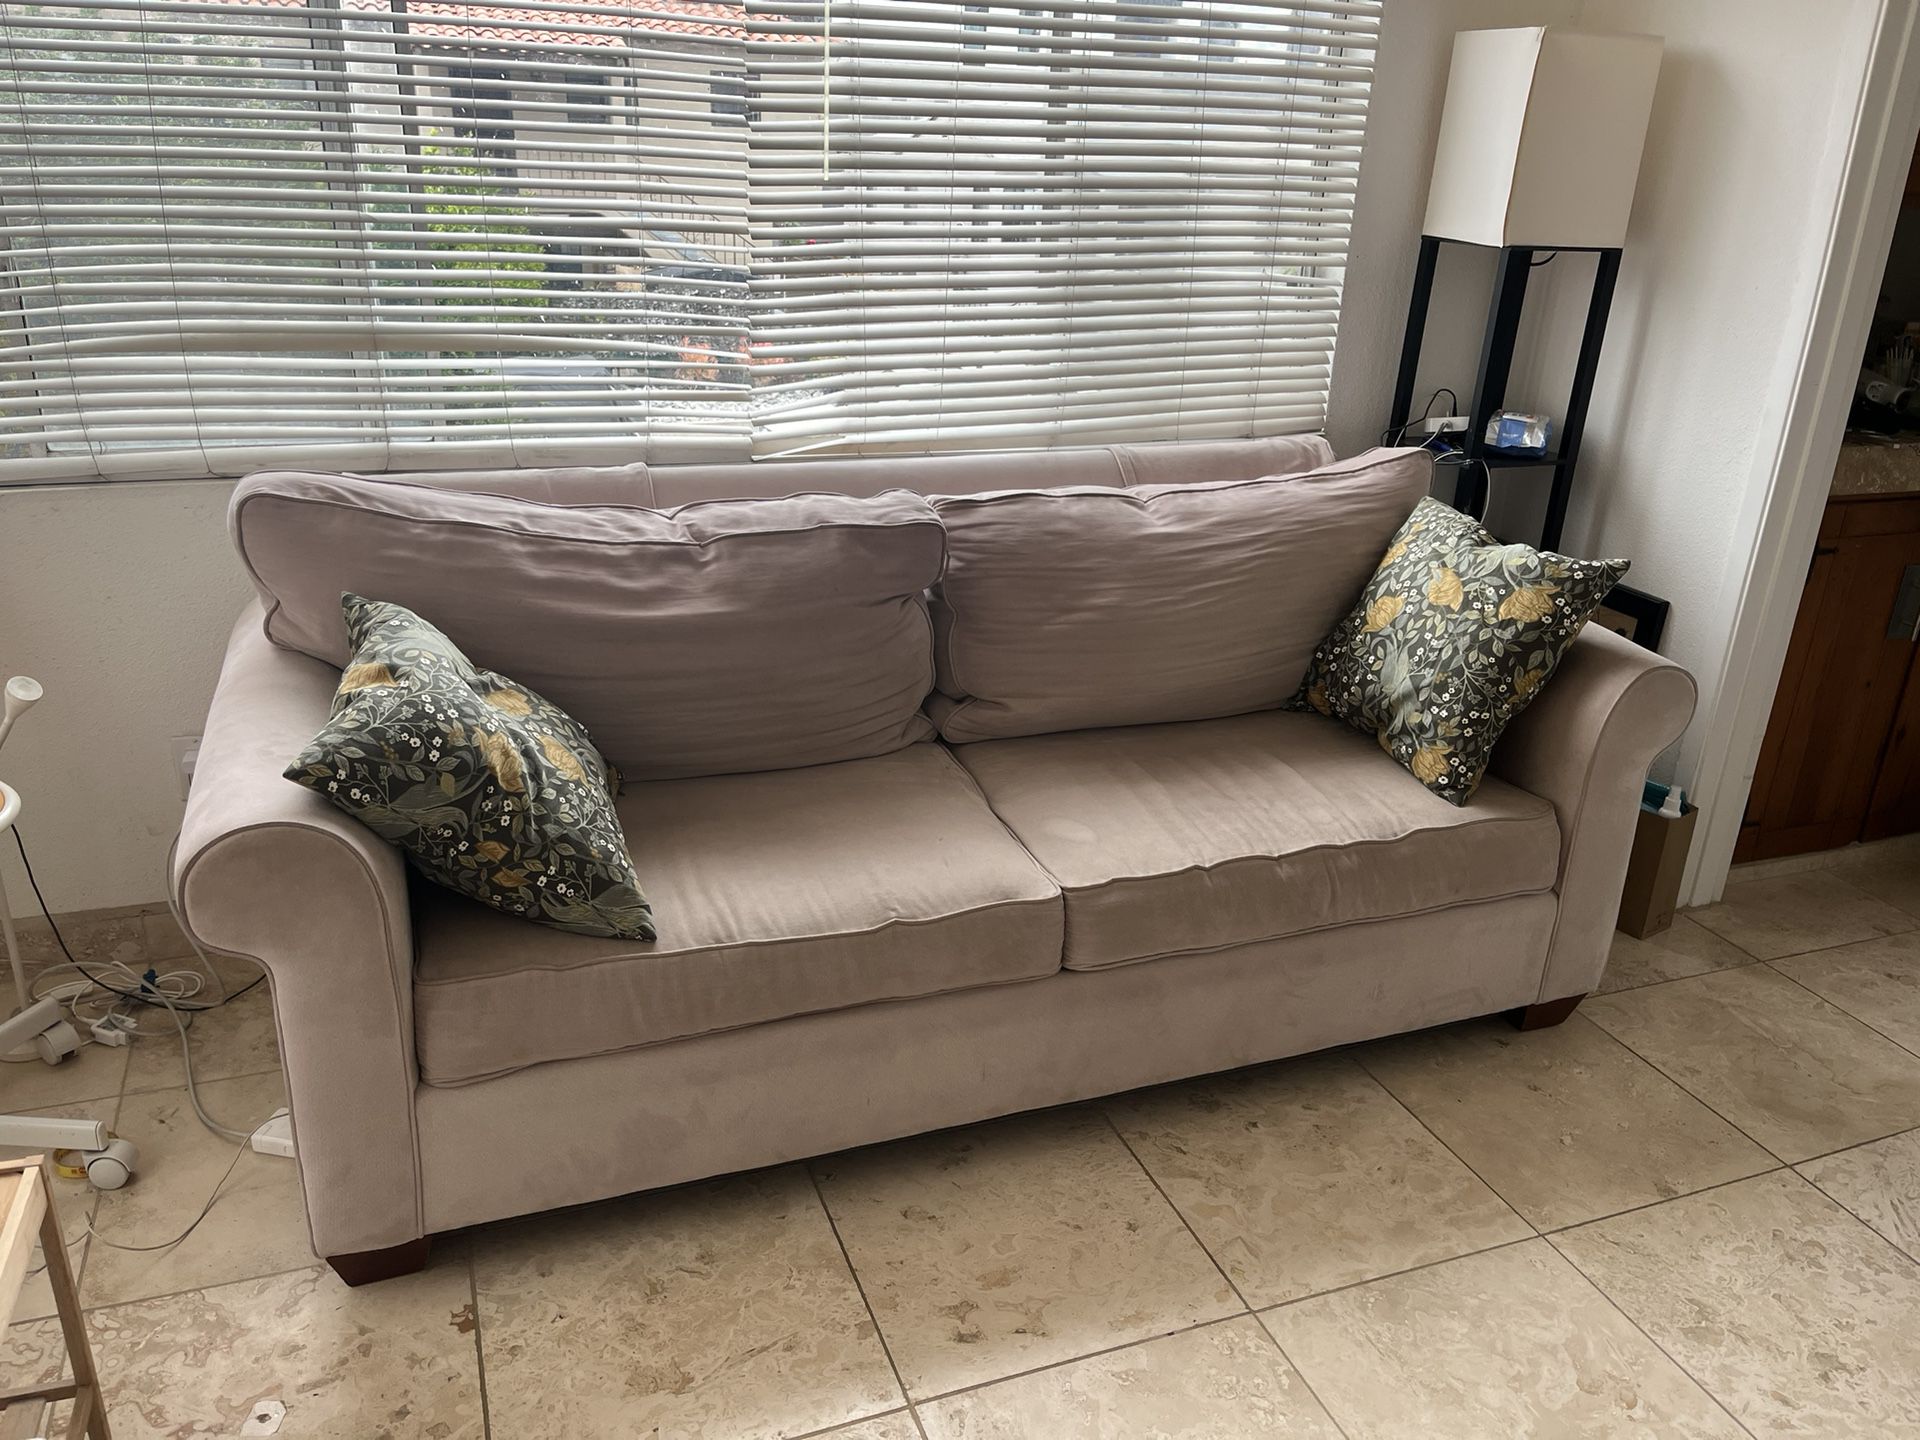 Free Sofa And Chair